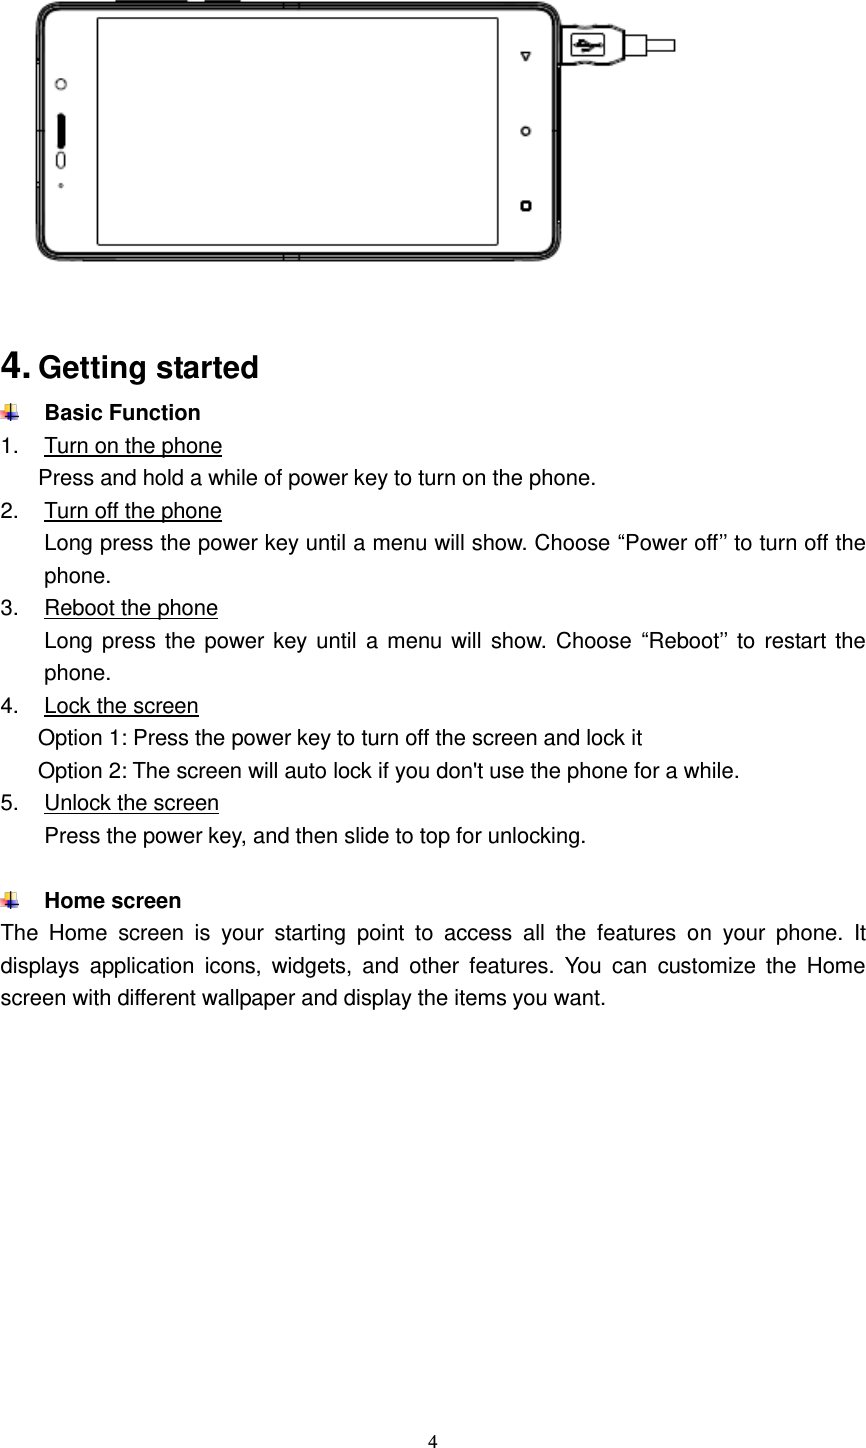  4    4. Getting started  Basic Function 1.  Turn on the phone Press and hold a while of power key to turn on the phone. 2.  Turn off the phone Long press the power key until a menu will show. Choose “Power off’’ to turn off the phone. 3.  Reboot the phone Long press  the power key until a menu will show.  Choose  “Reboot’’ to  restart the phone. 4.  Lock the screen Option 1: Press the power key to turn off the screen and lock it Option 2: The screen will auto lock if you don&apos;t use the phone for a while. 5.  Unlock the screen Press the power key, and then slide to top for unlocking.   Home screen The  Home  screen  is  your  starting  point  to  access  all  the  features  on  your  phone.  It displays  application  icons,  widgets,  and  other  features.  You  can  customize  the  Home screen with different wallpaper and display the items you want.   